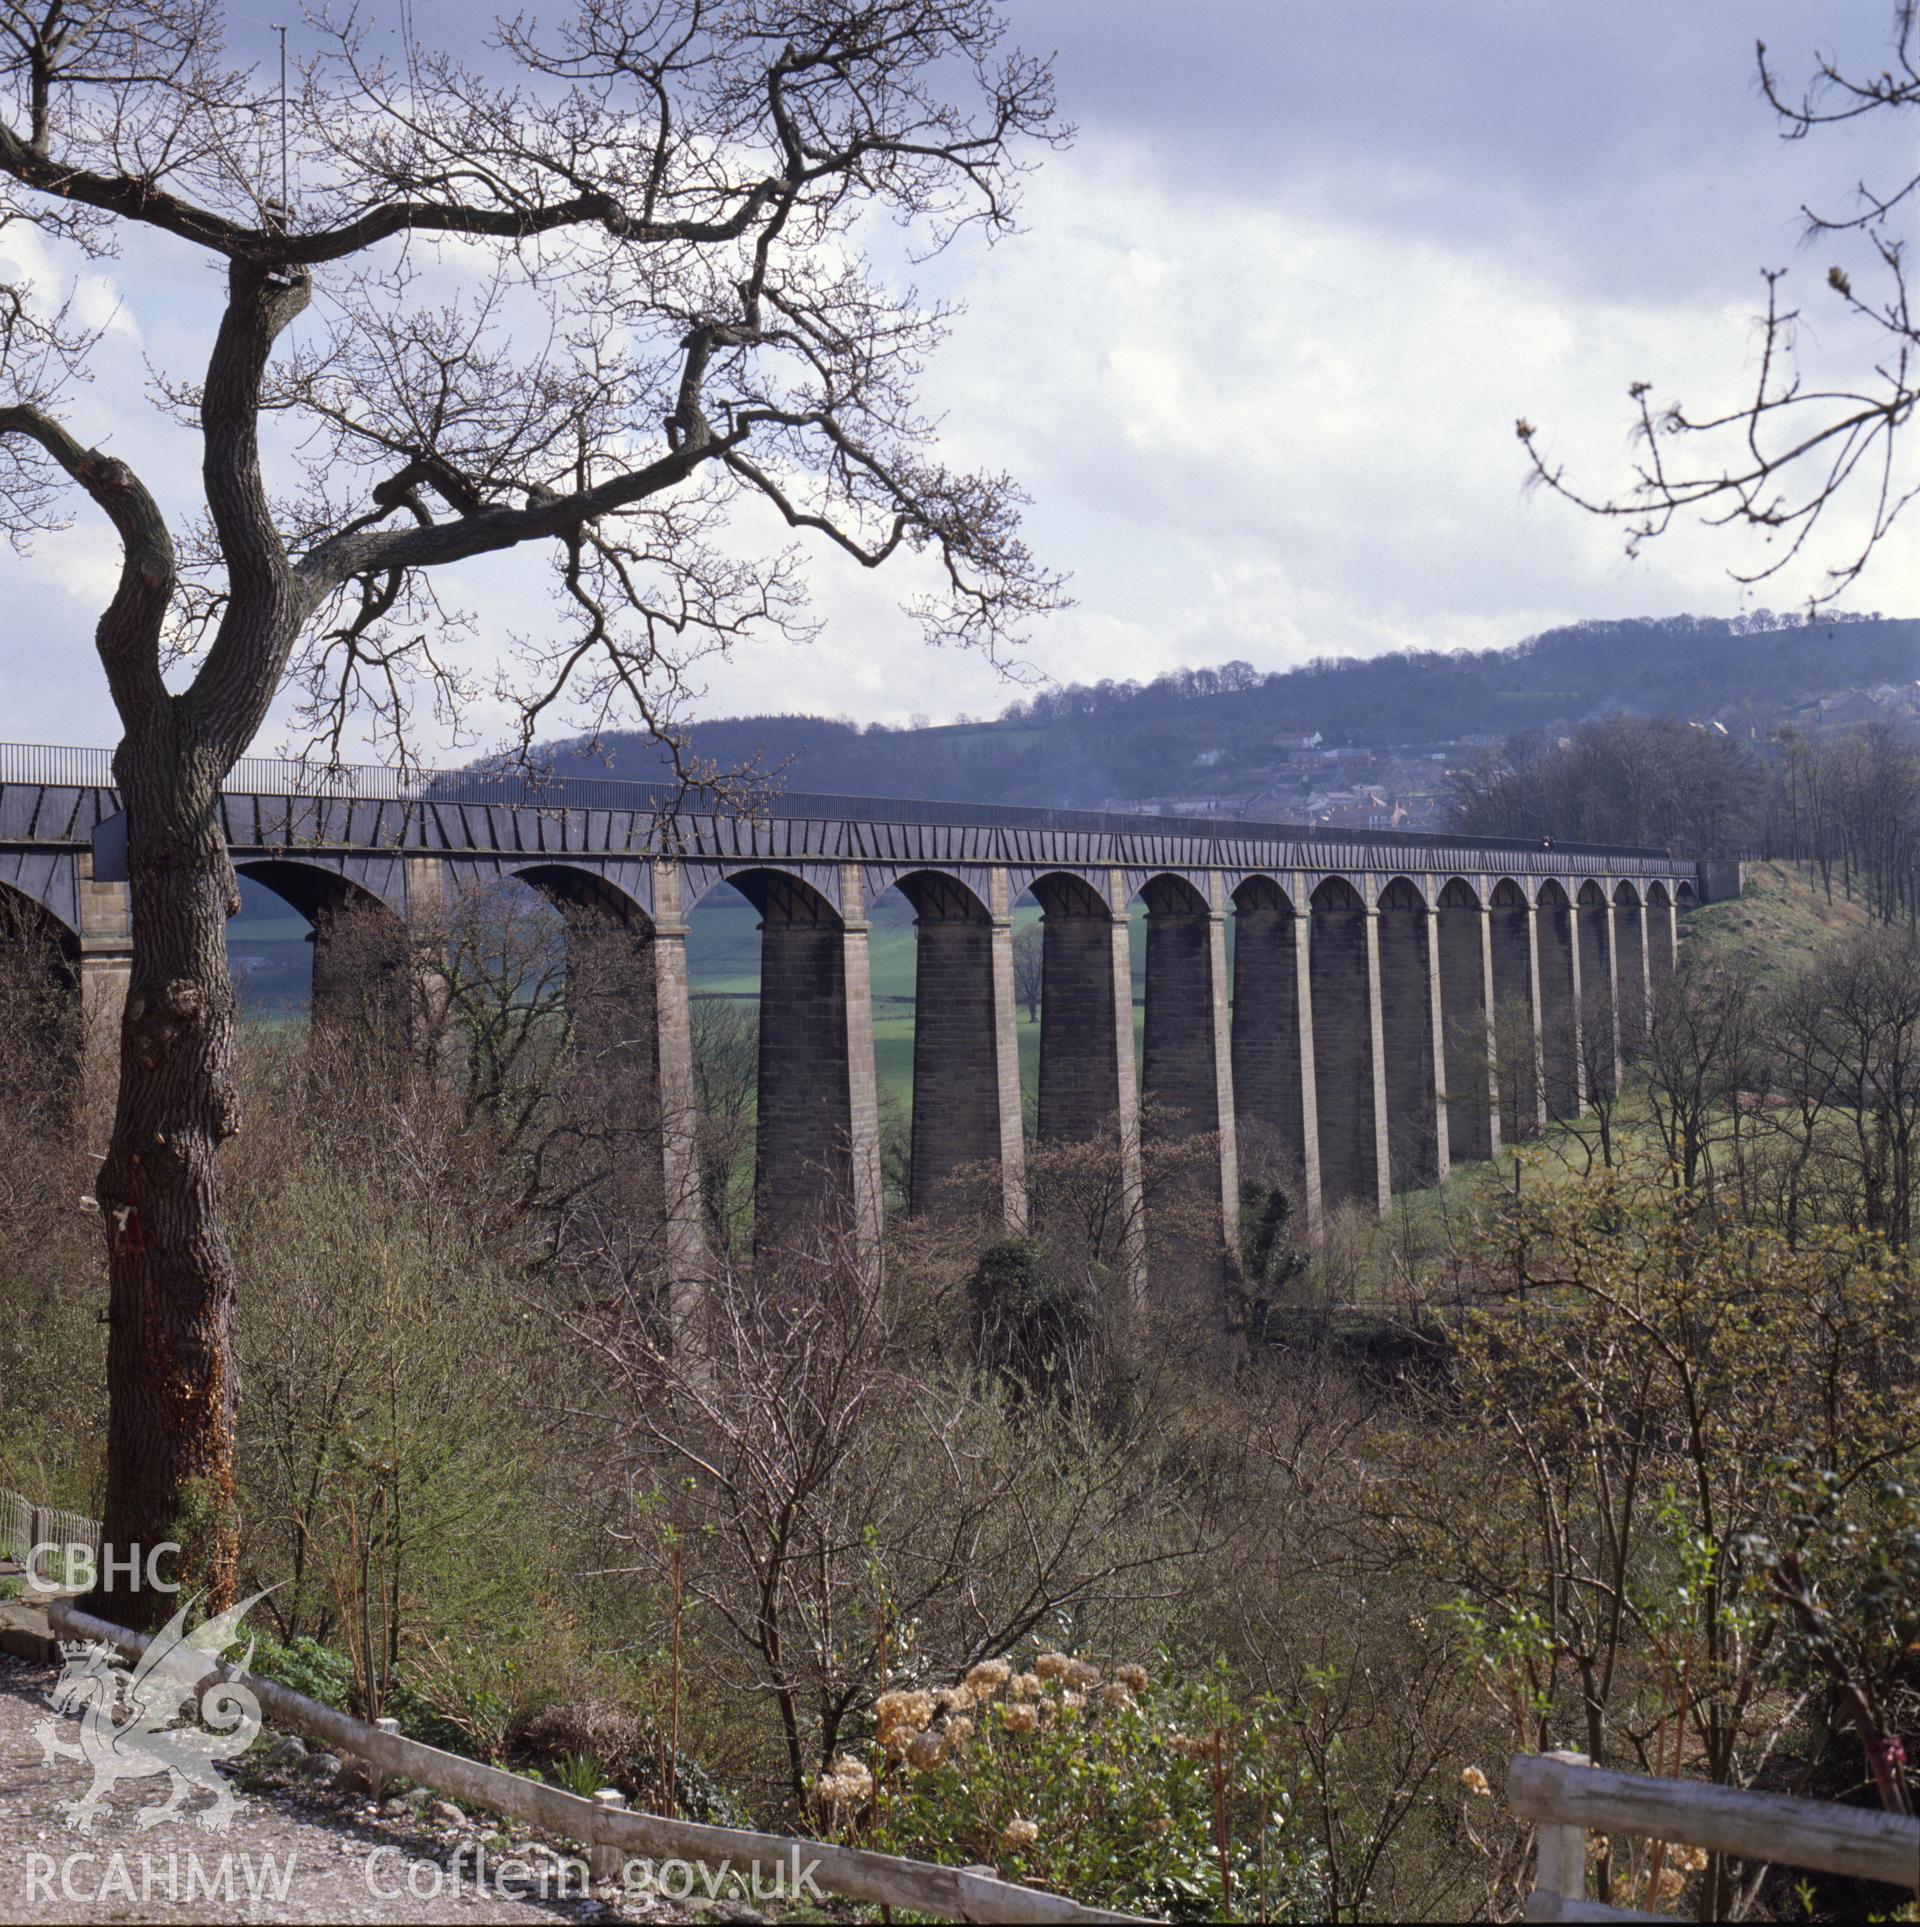 1 colour transparency showing view of Pontcysyllte Aqueduct, undated; collated by the former Central Office of Information.